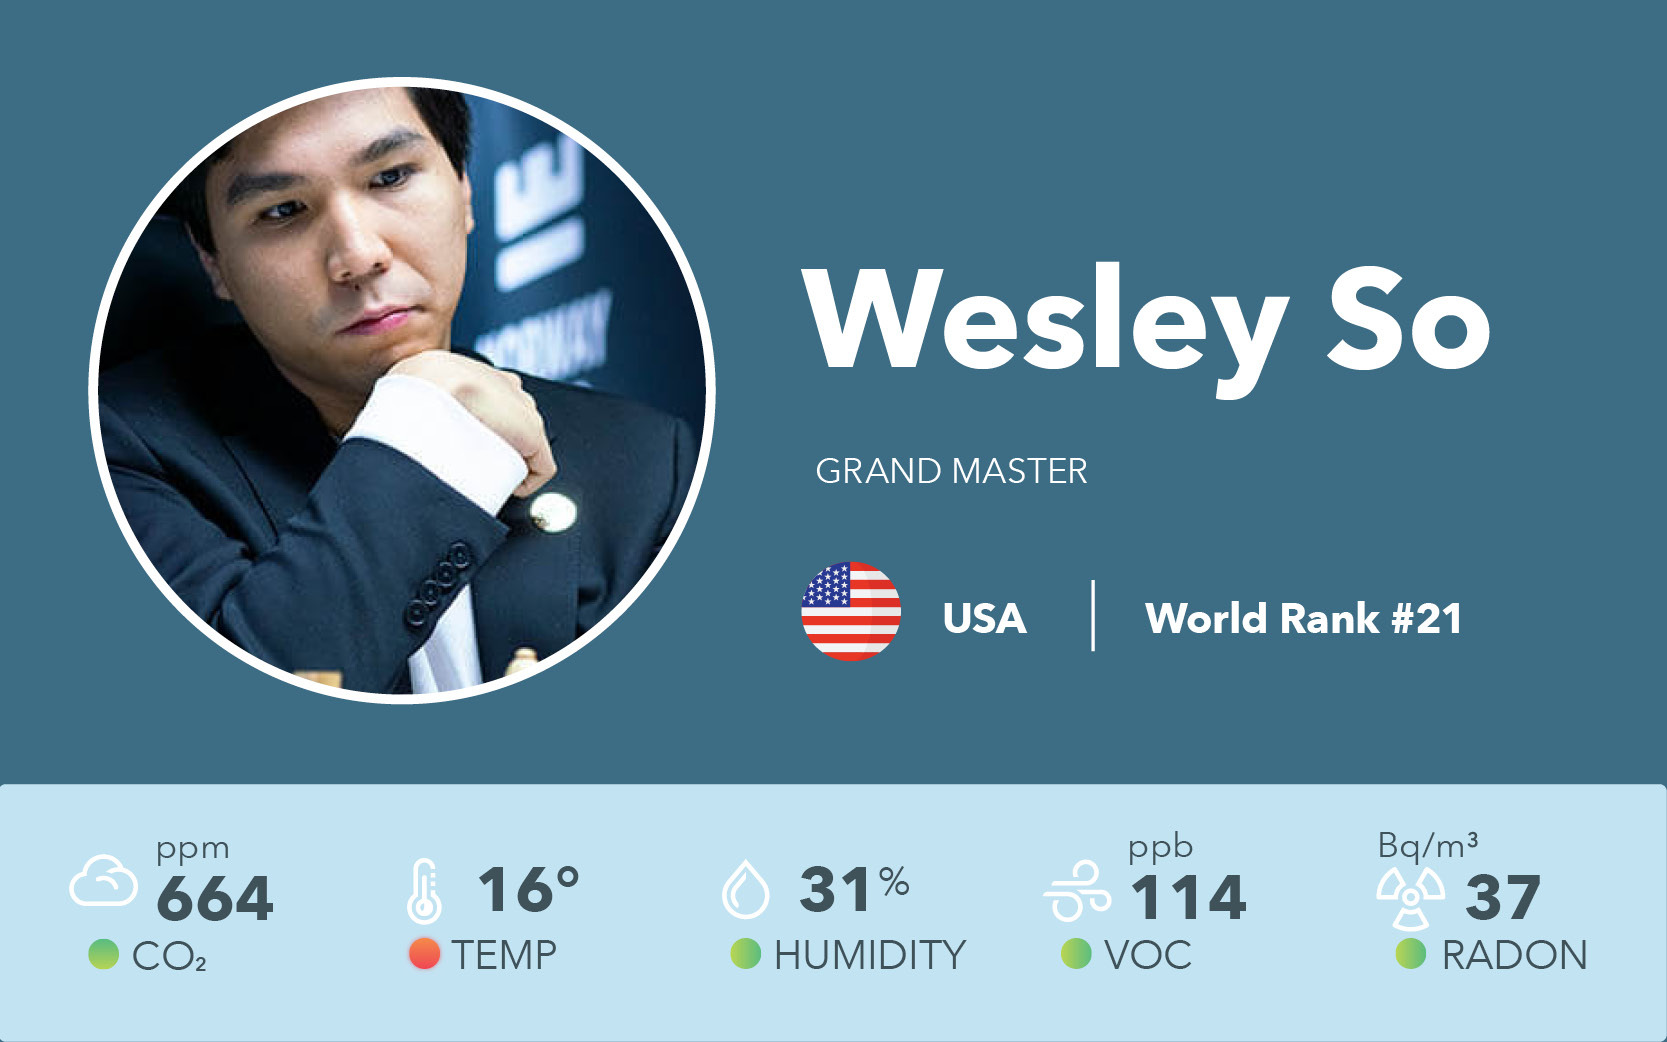 Wesley So: I'd like to apologise to Magnus for ruining his Valentine's  Day! 